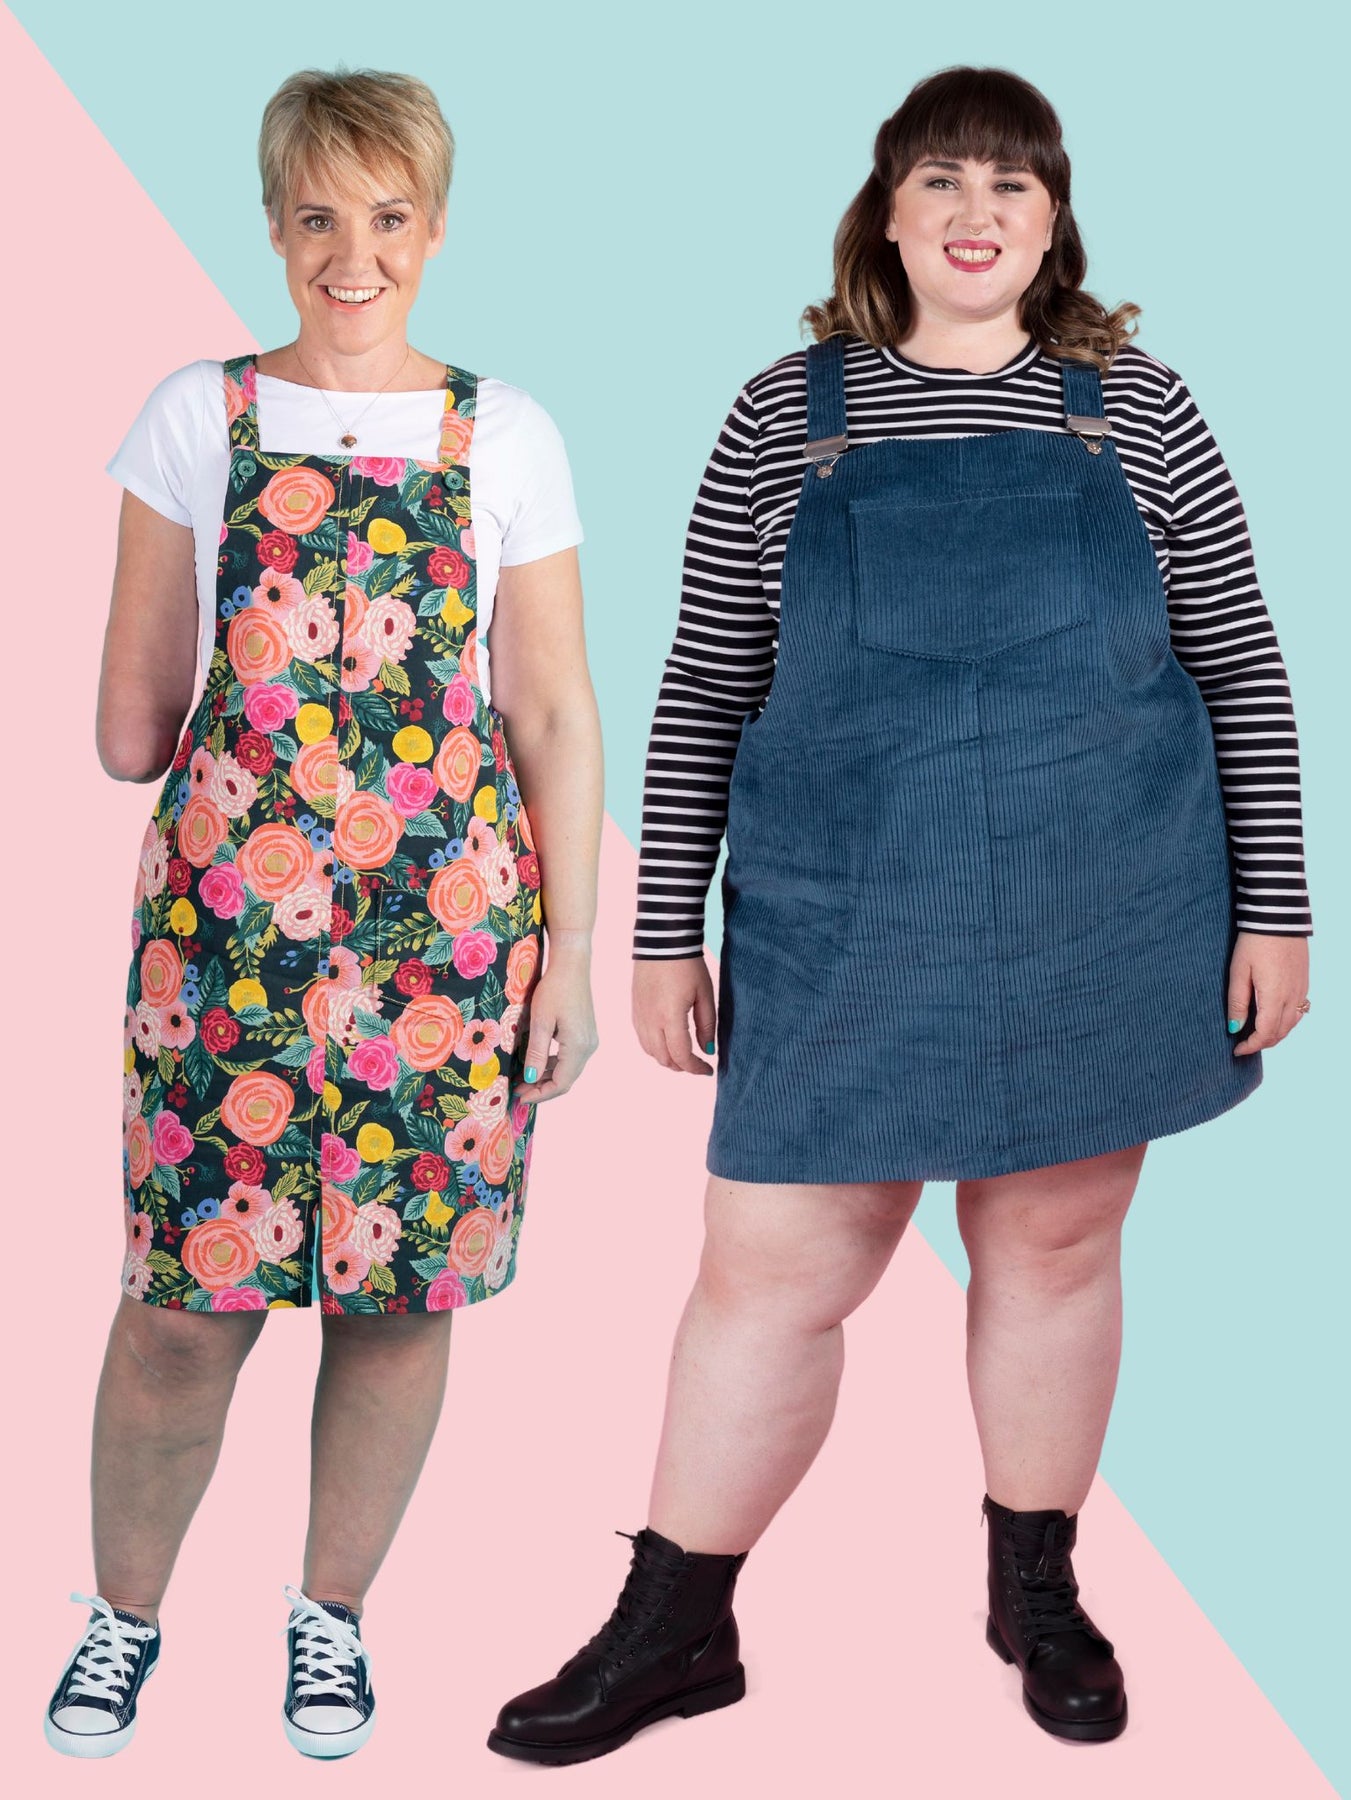 Free Girls Pinafore Pattern Tutorial | Sew Simple Home